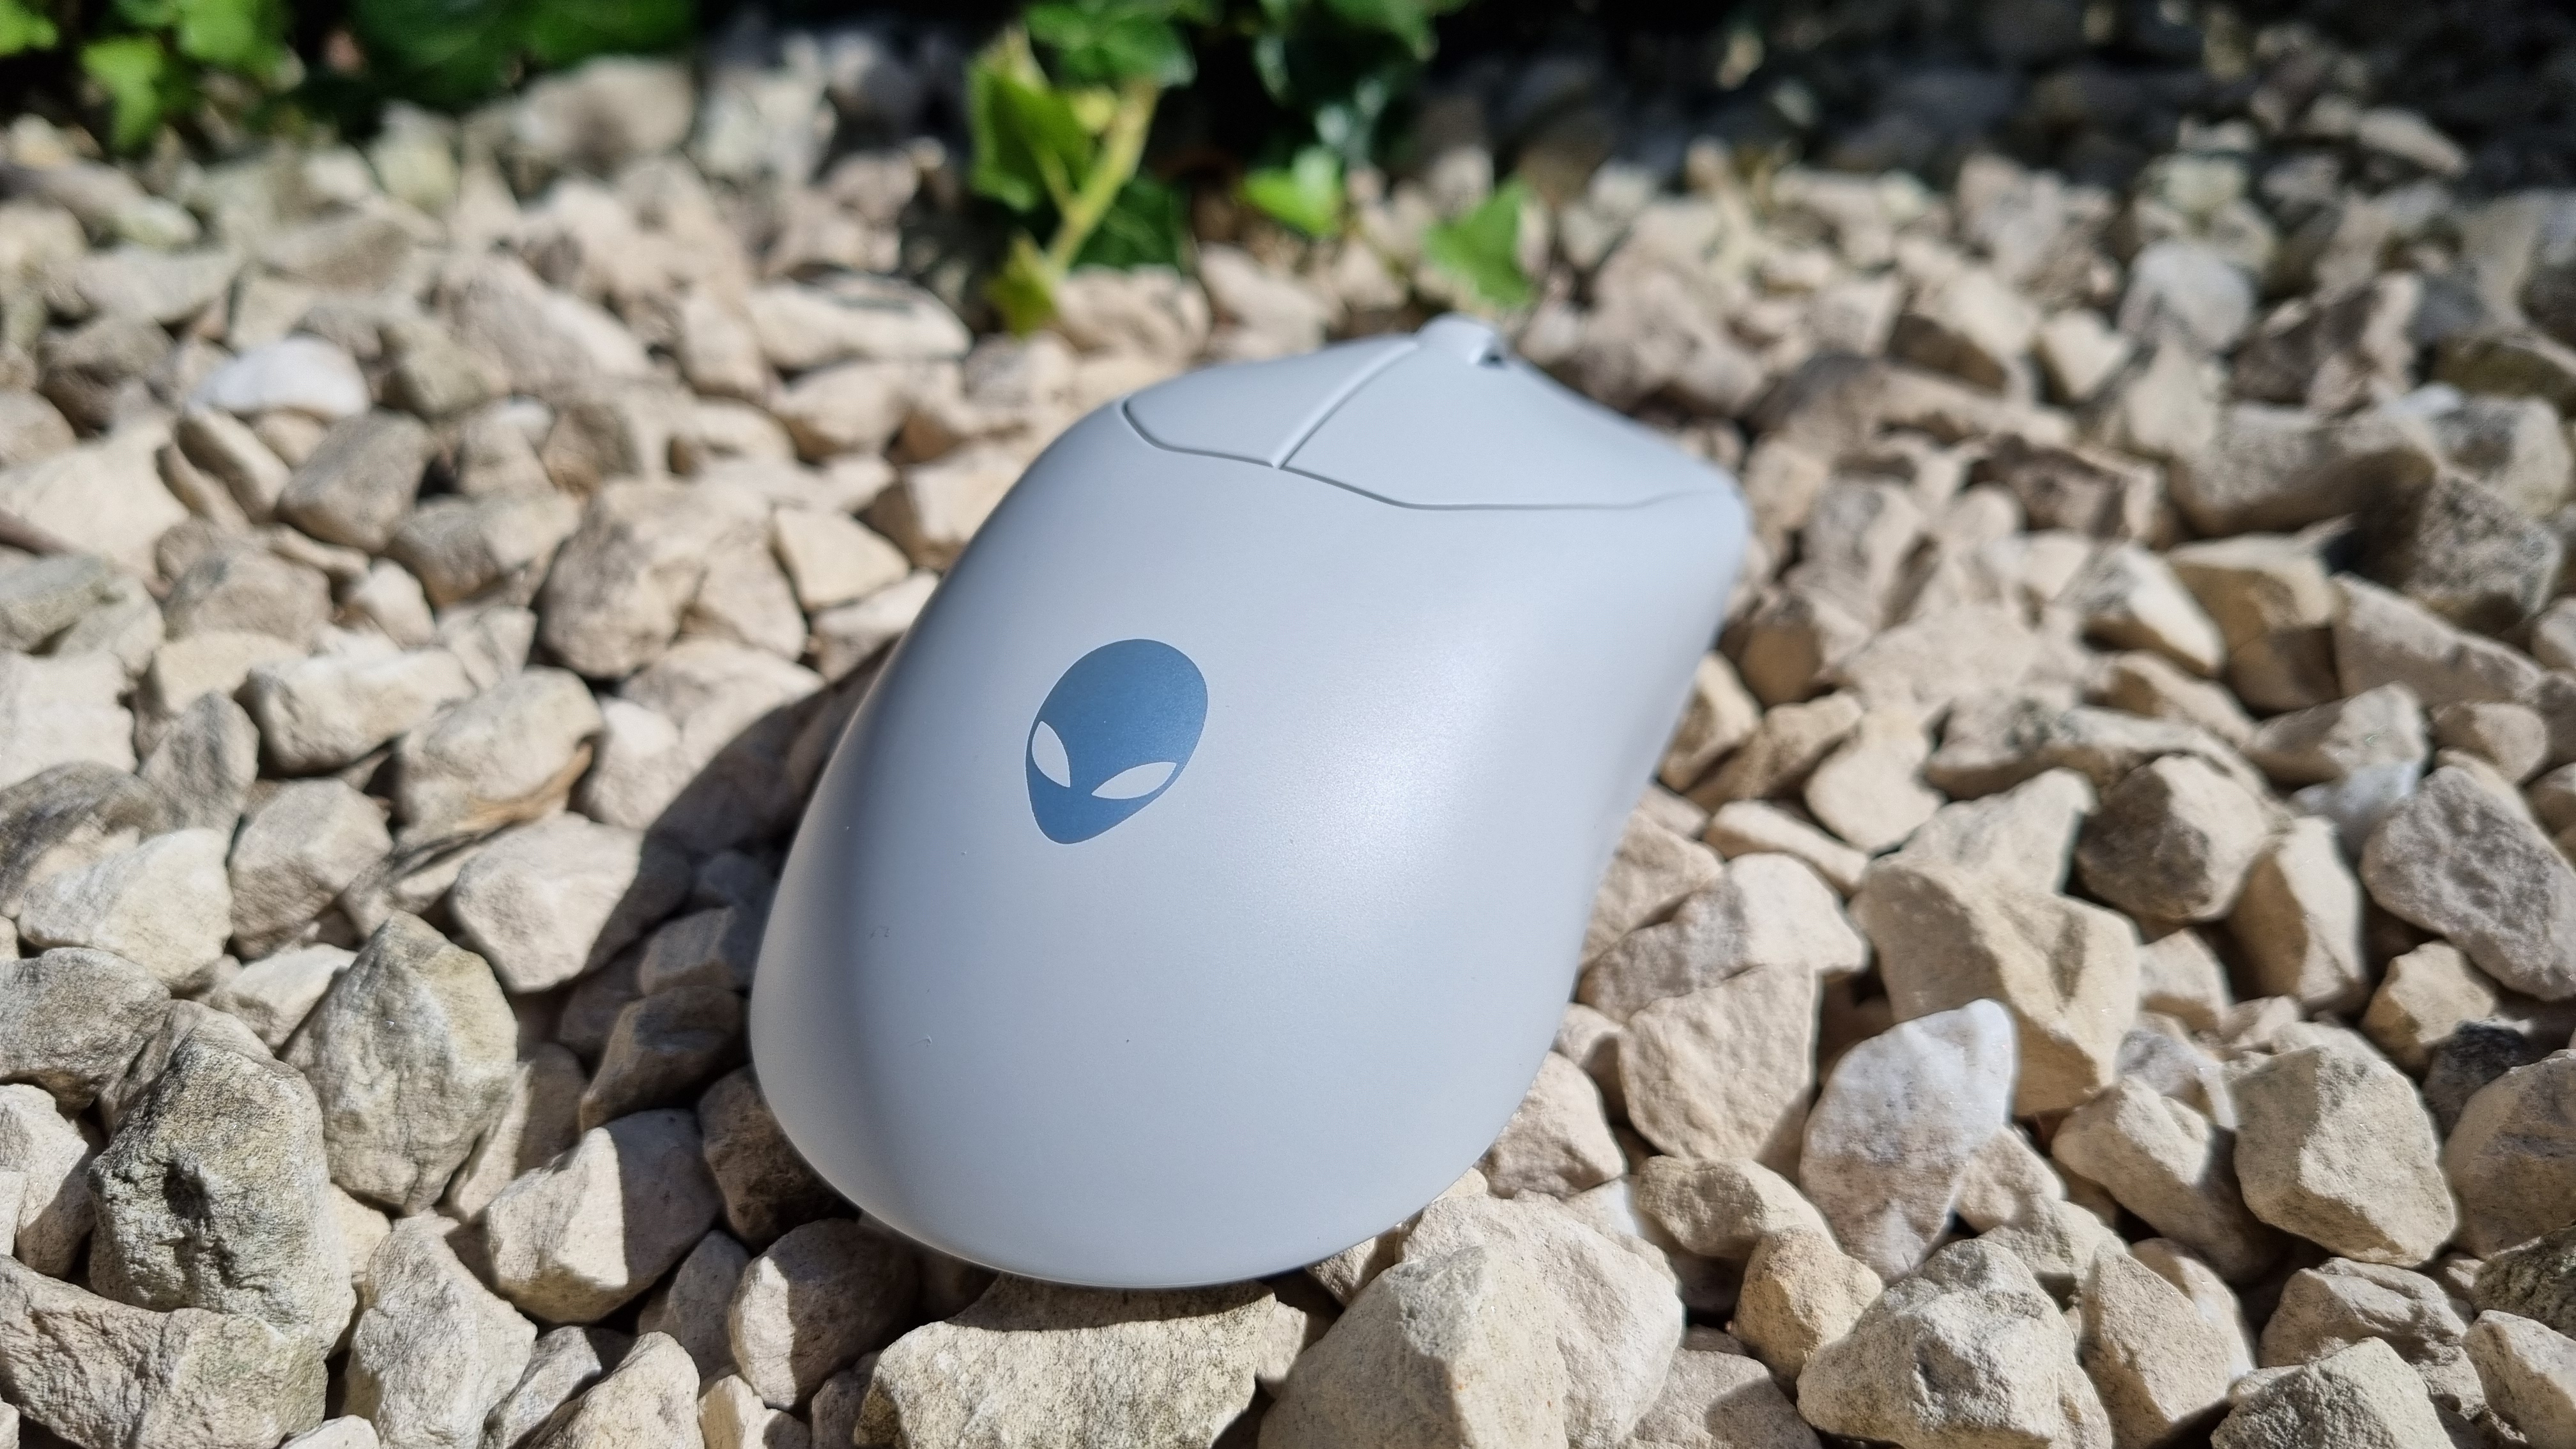 The Alienware Pro Wireless gaming mouse on white gravel, showing the silver Alienware logo